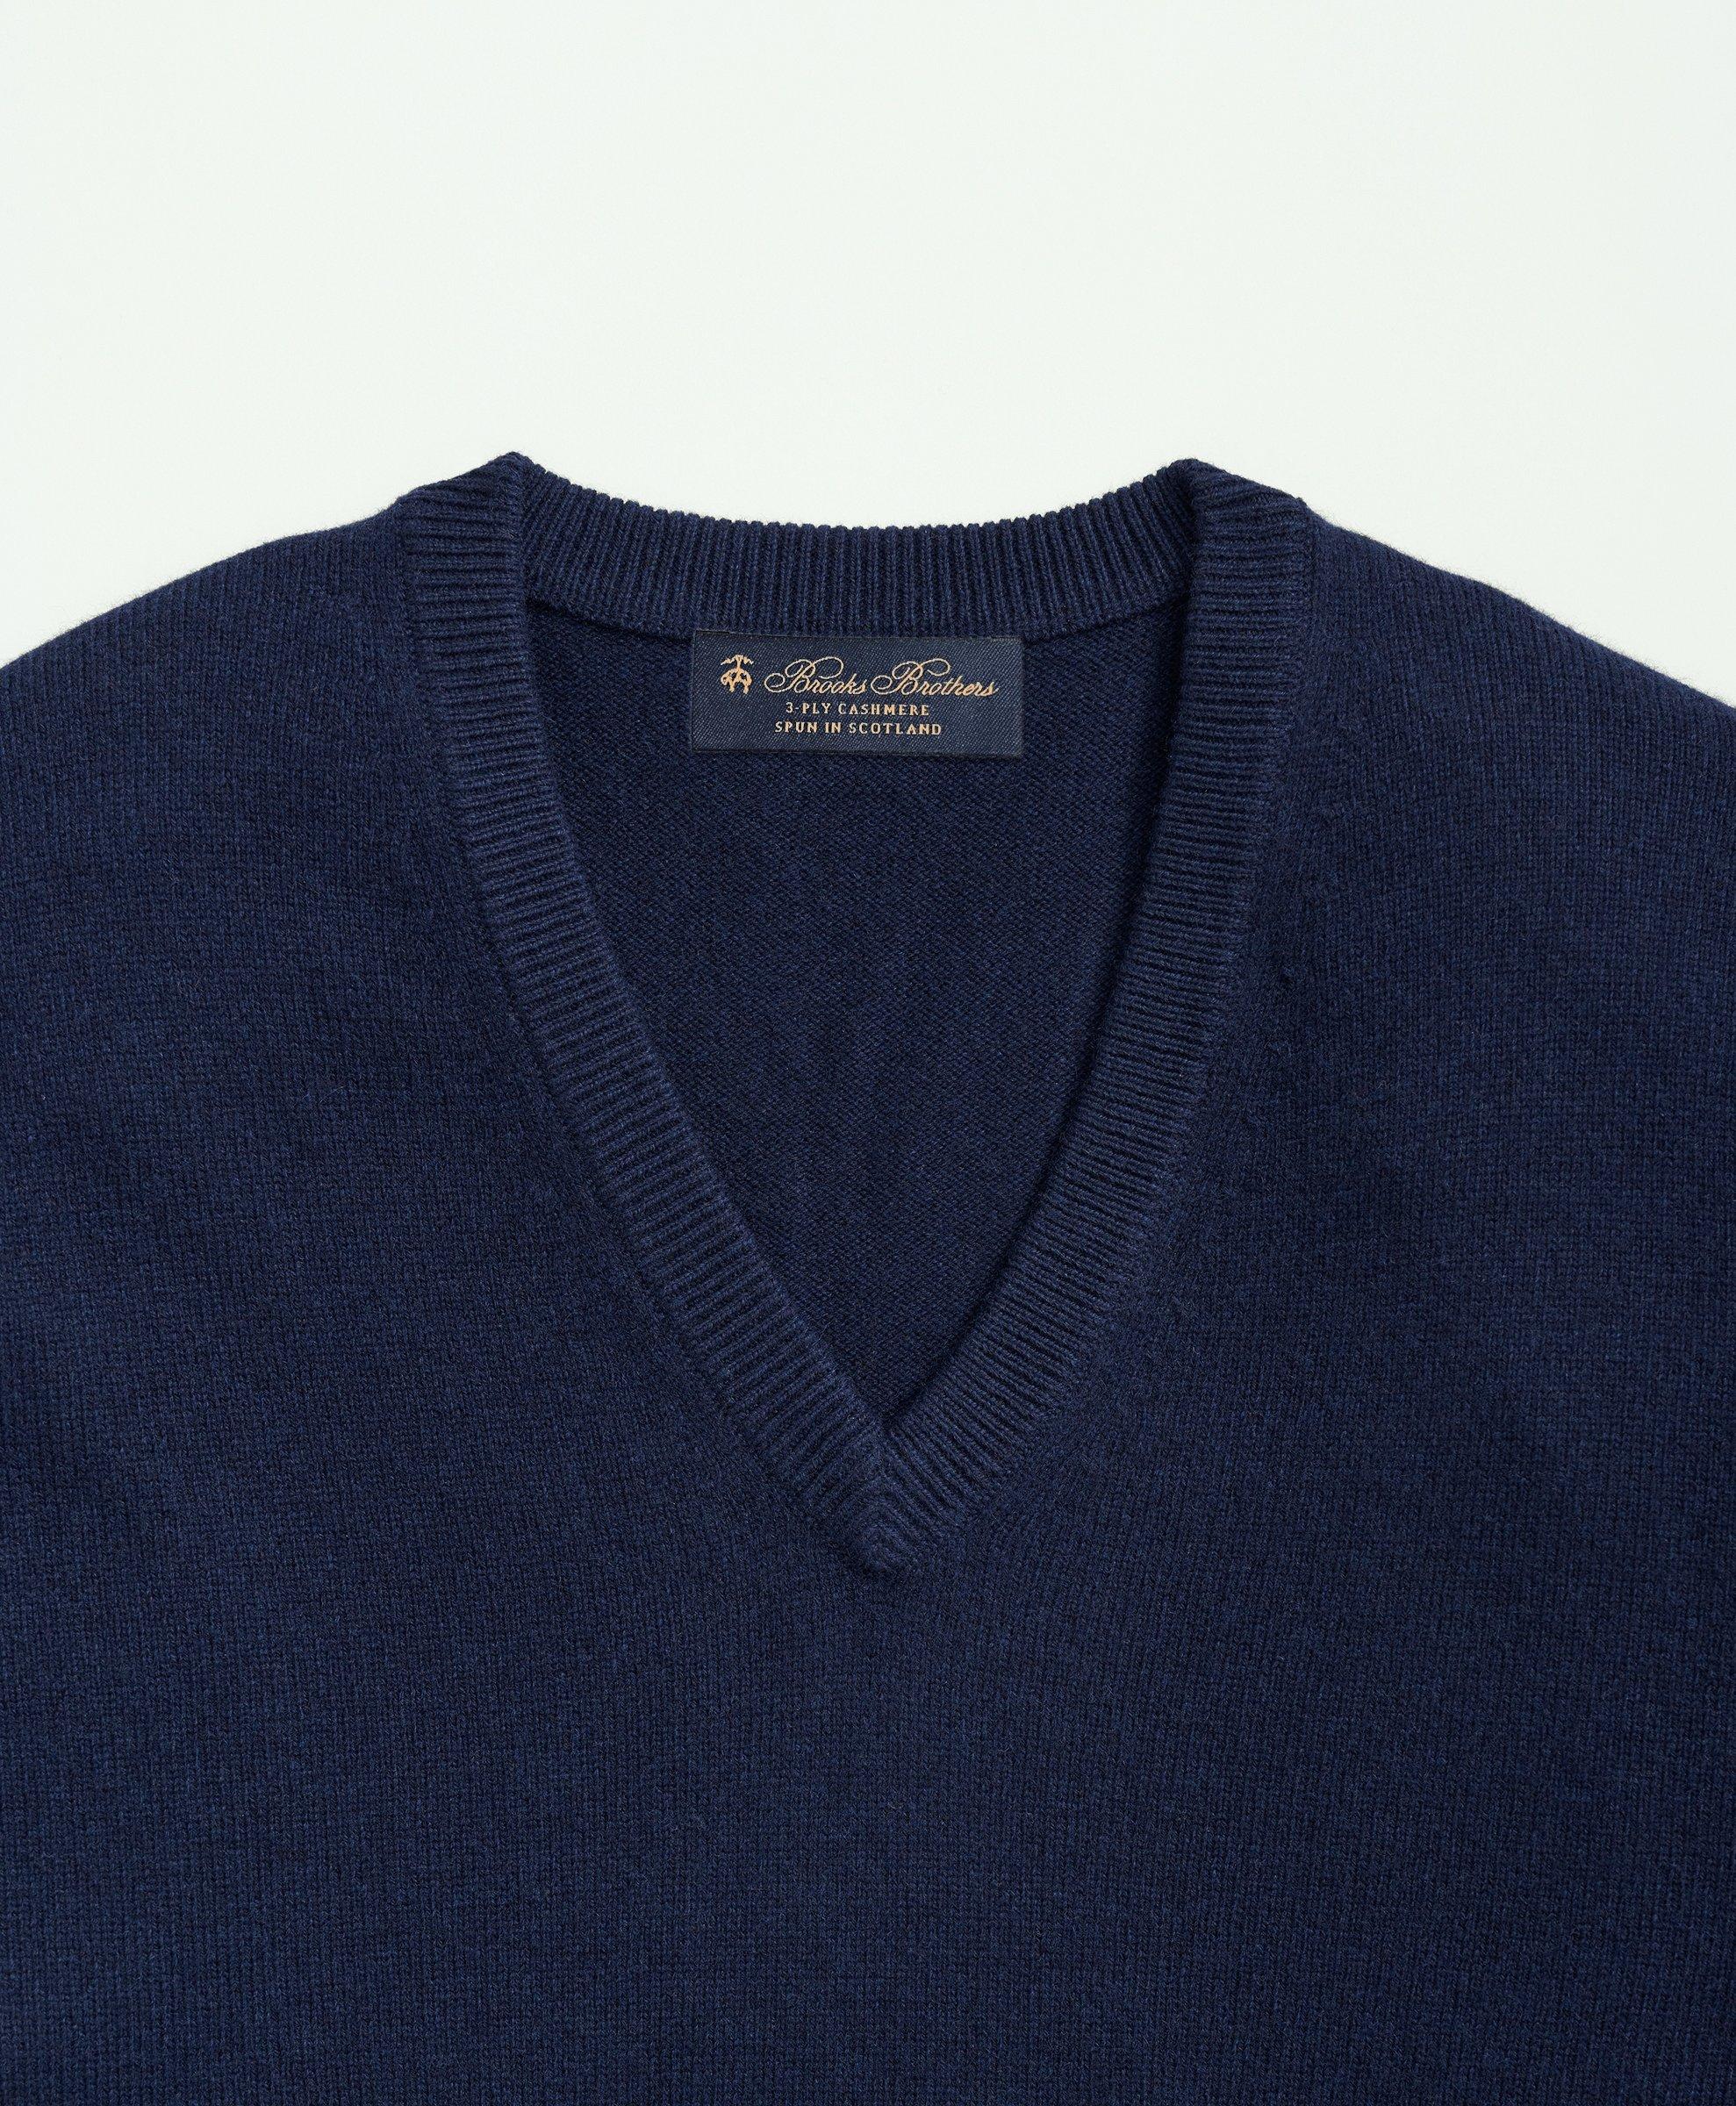 Big & Tall 3-Ply Cashmere V-Neck Sweater, image 2